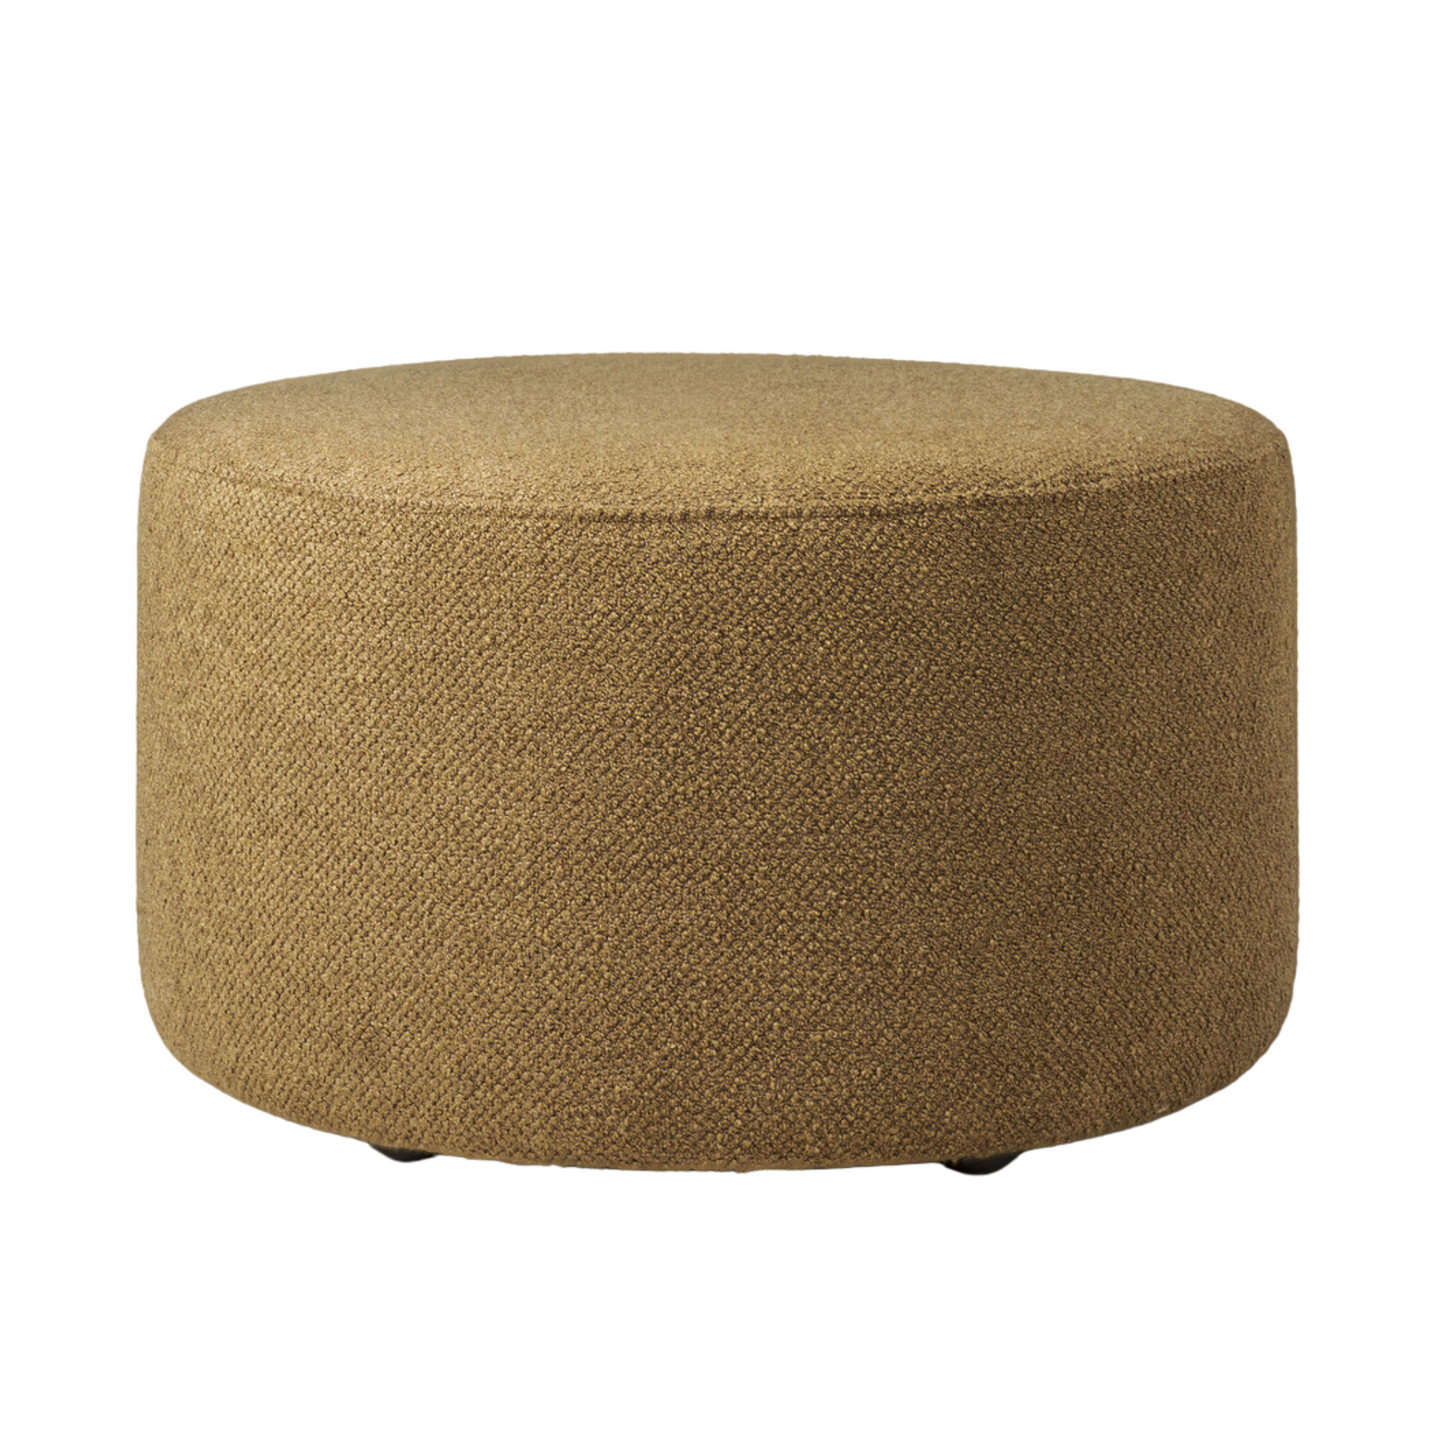 Barrow pouf by Jacques Deneef | Ginger